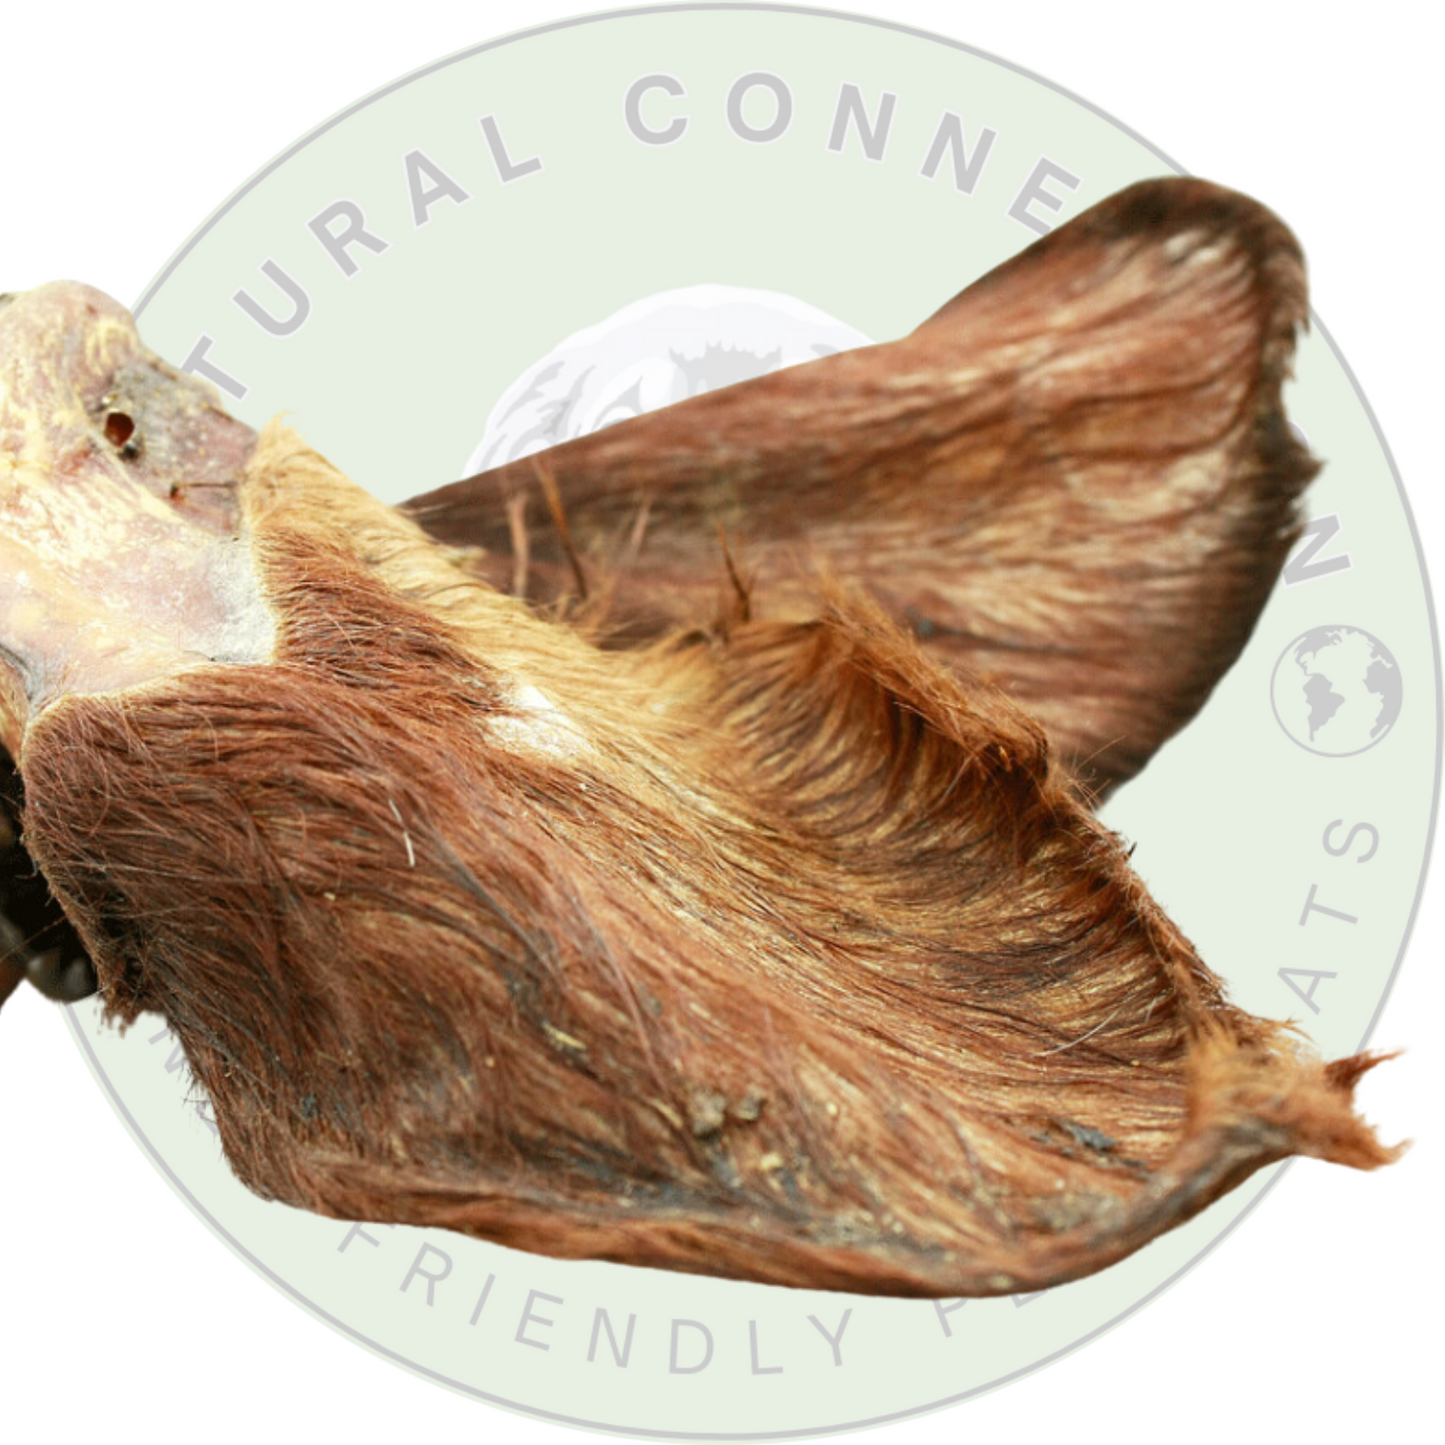 Hairy Veal Ear | Premium Quality Large Dog Chew by Natural Connection